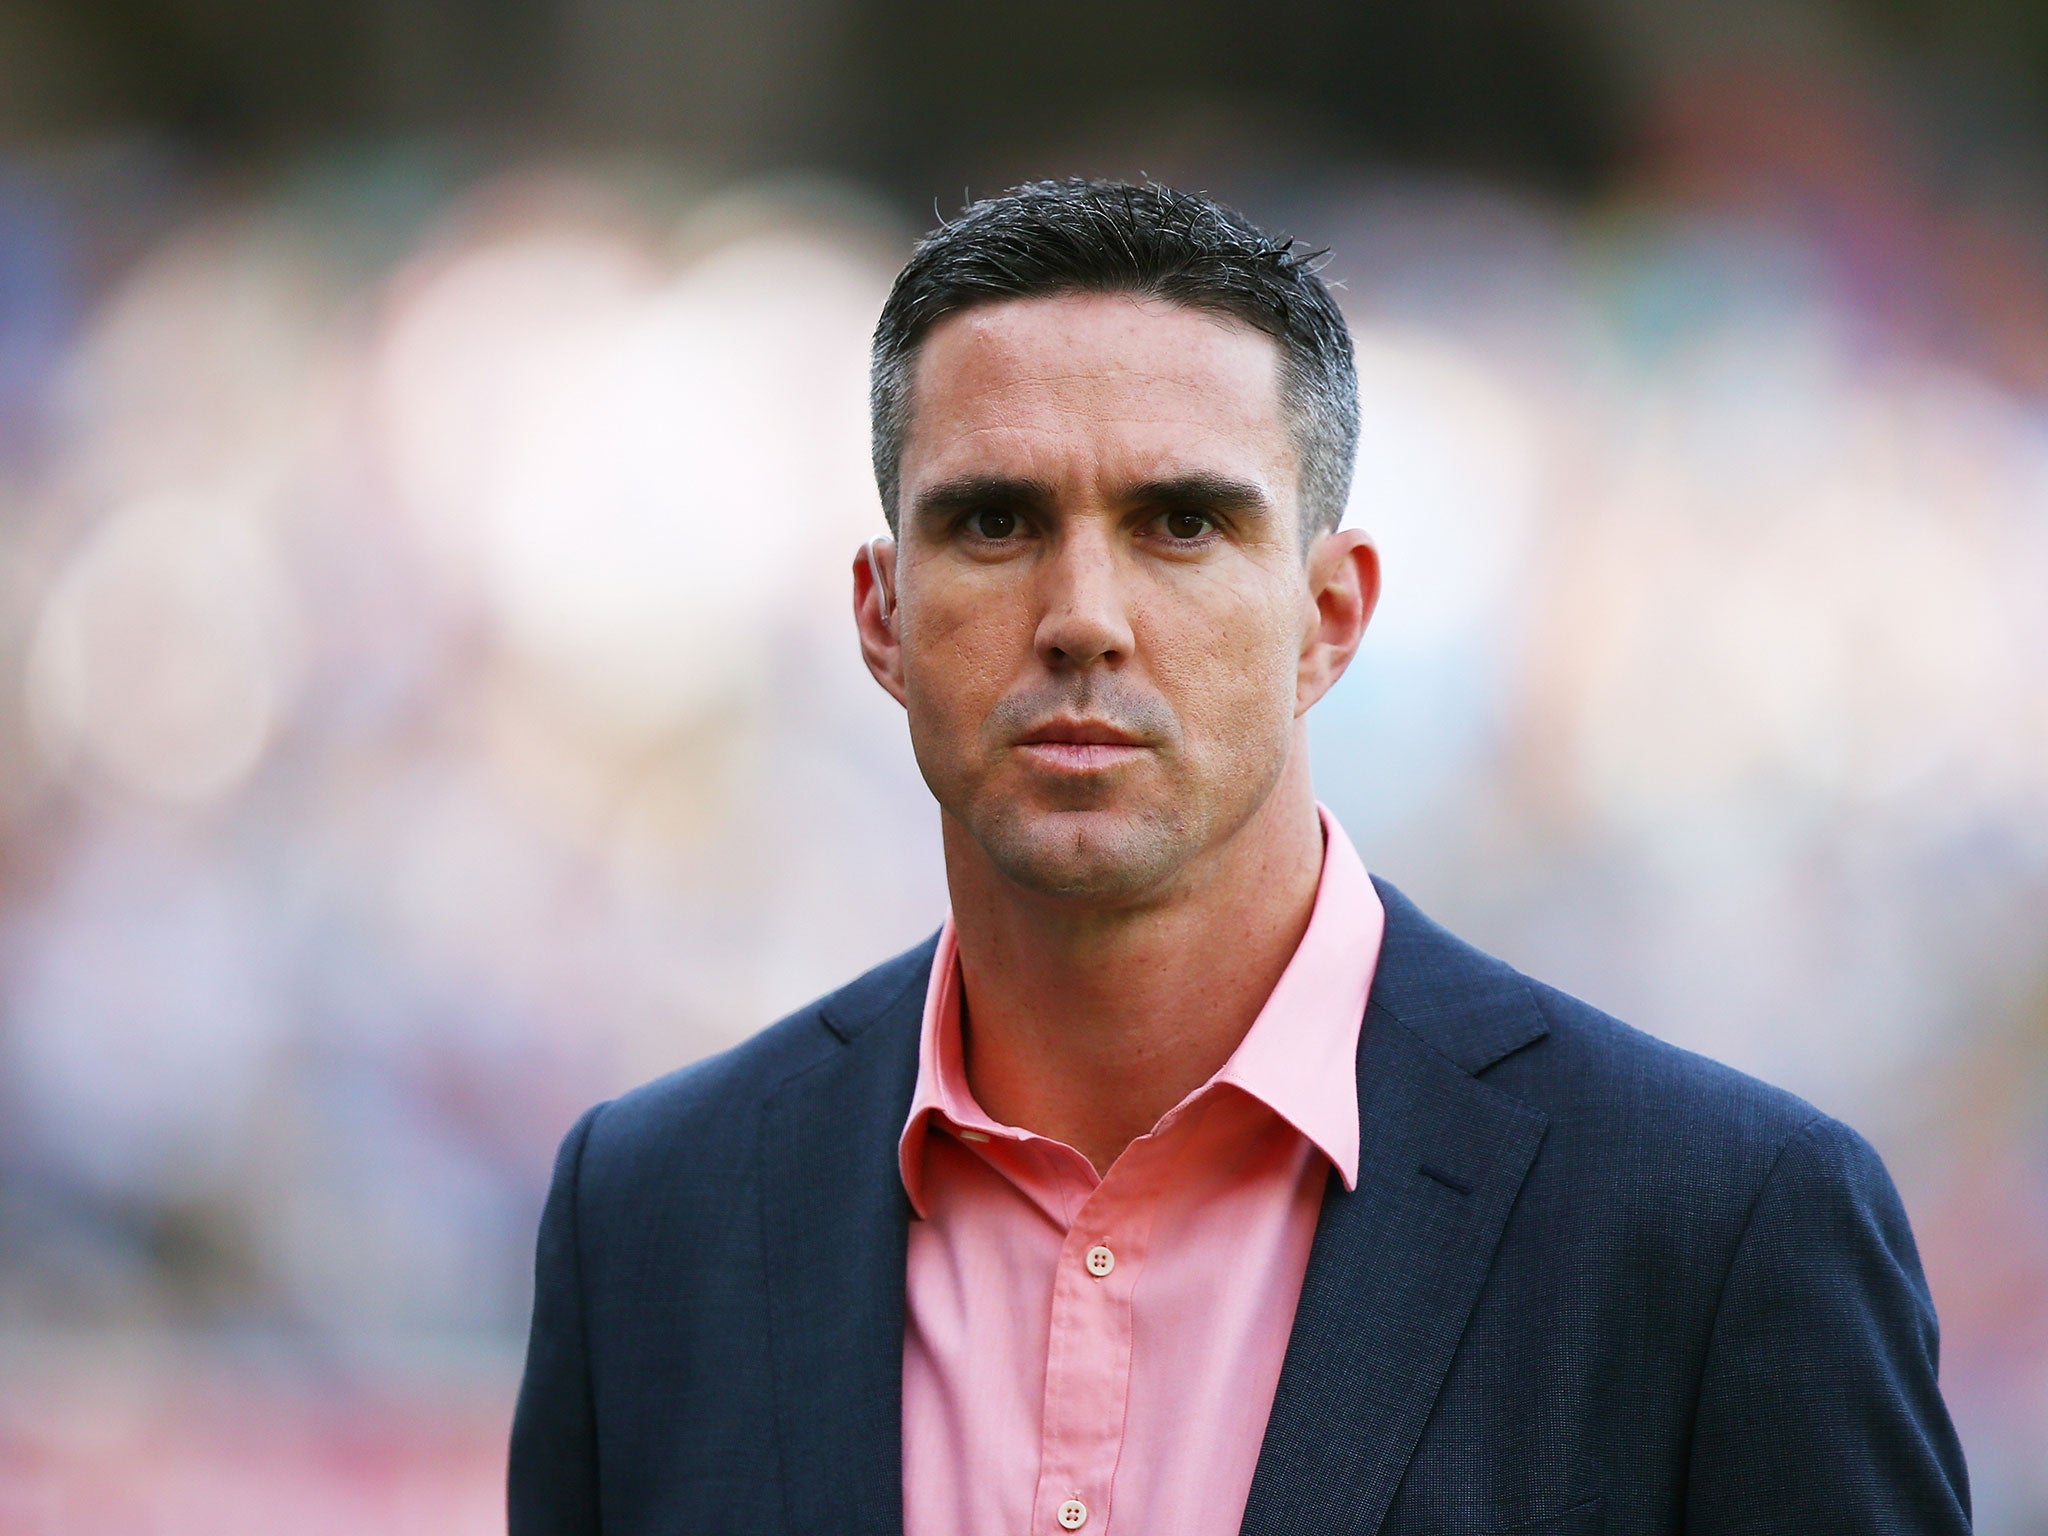 Kevin Pietersen wants to play for England again